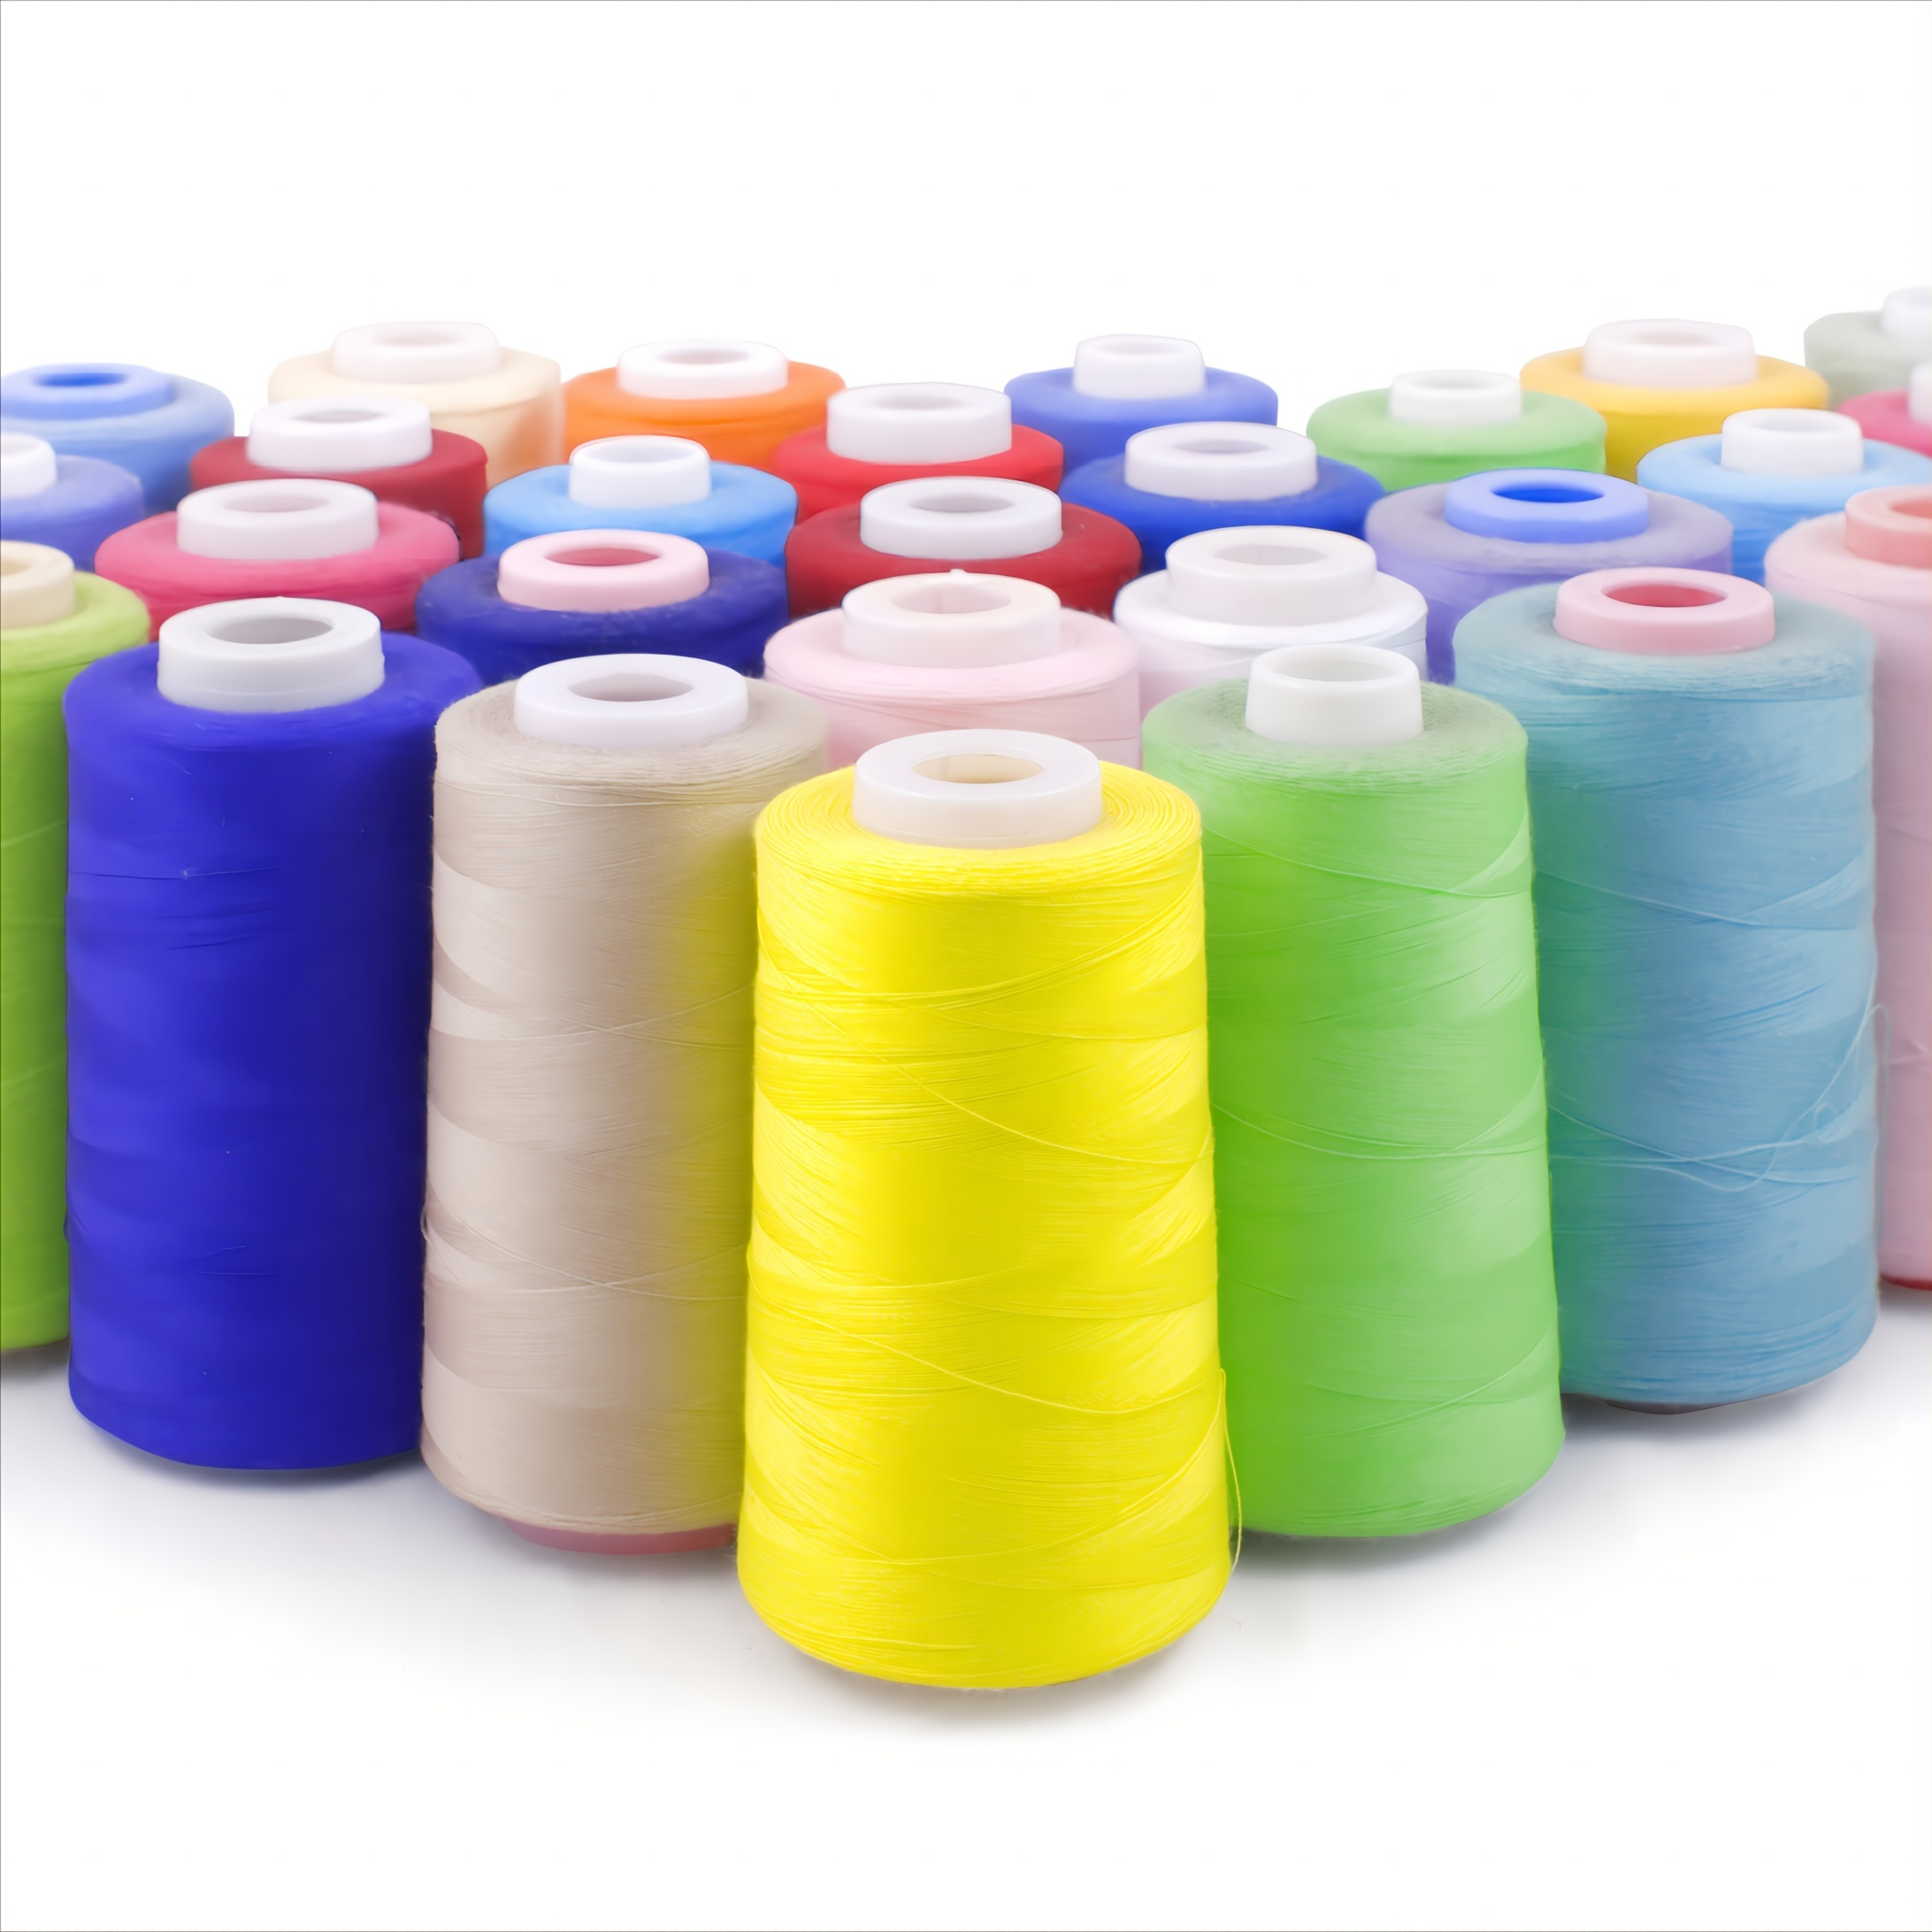 Polyester Sewing Thread Spools 3000 Yards Each Spool 40/2 All-Purpose  Threads for Sewing Machine and Hand Repair Works for Hand - AliExpress